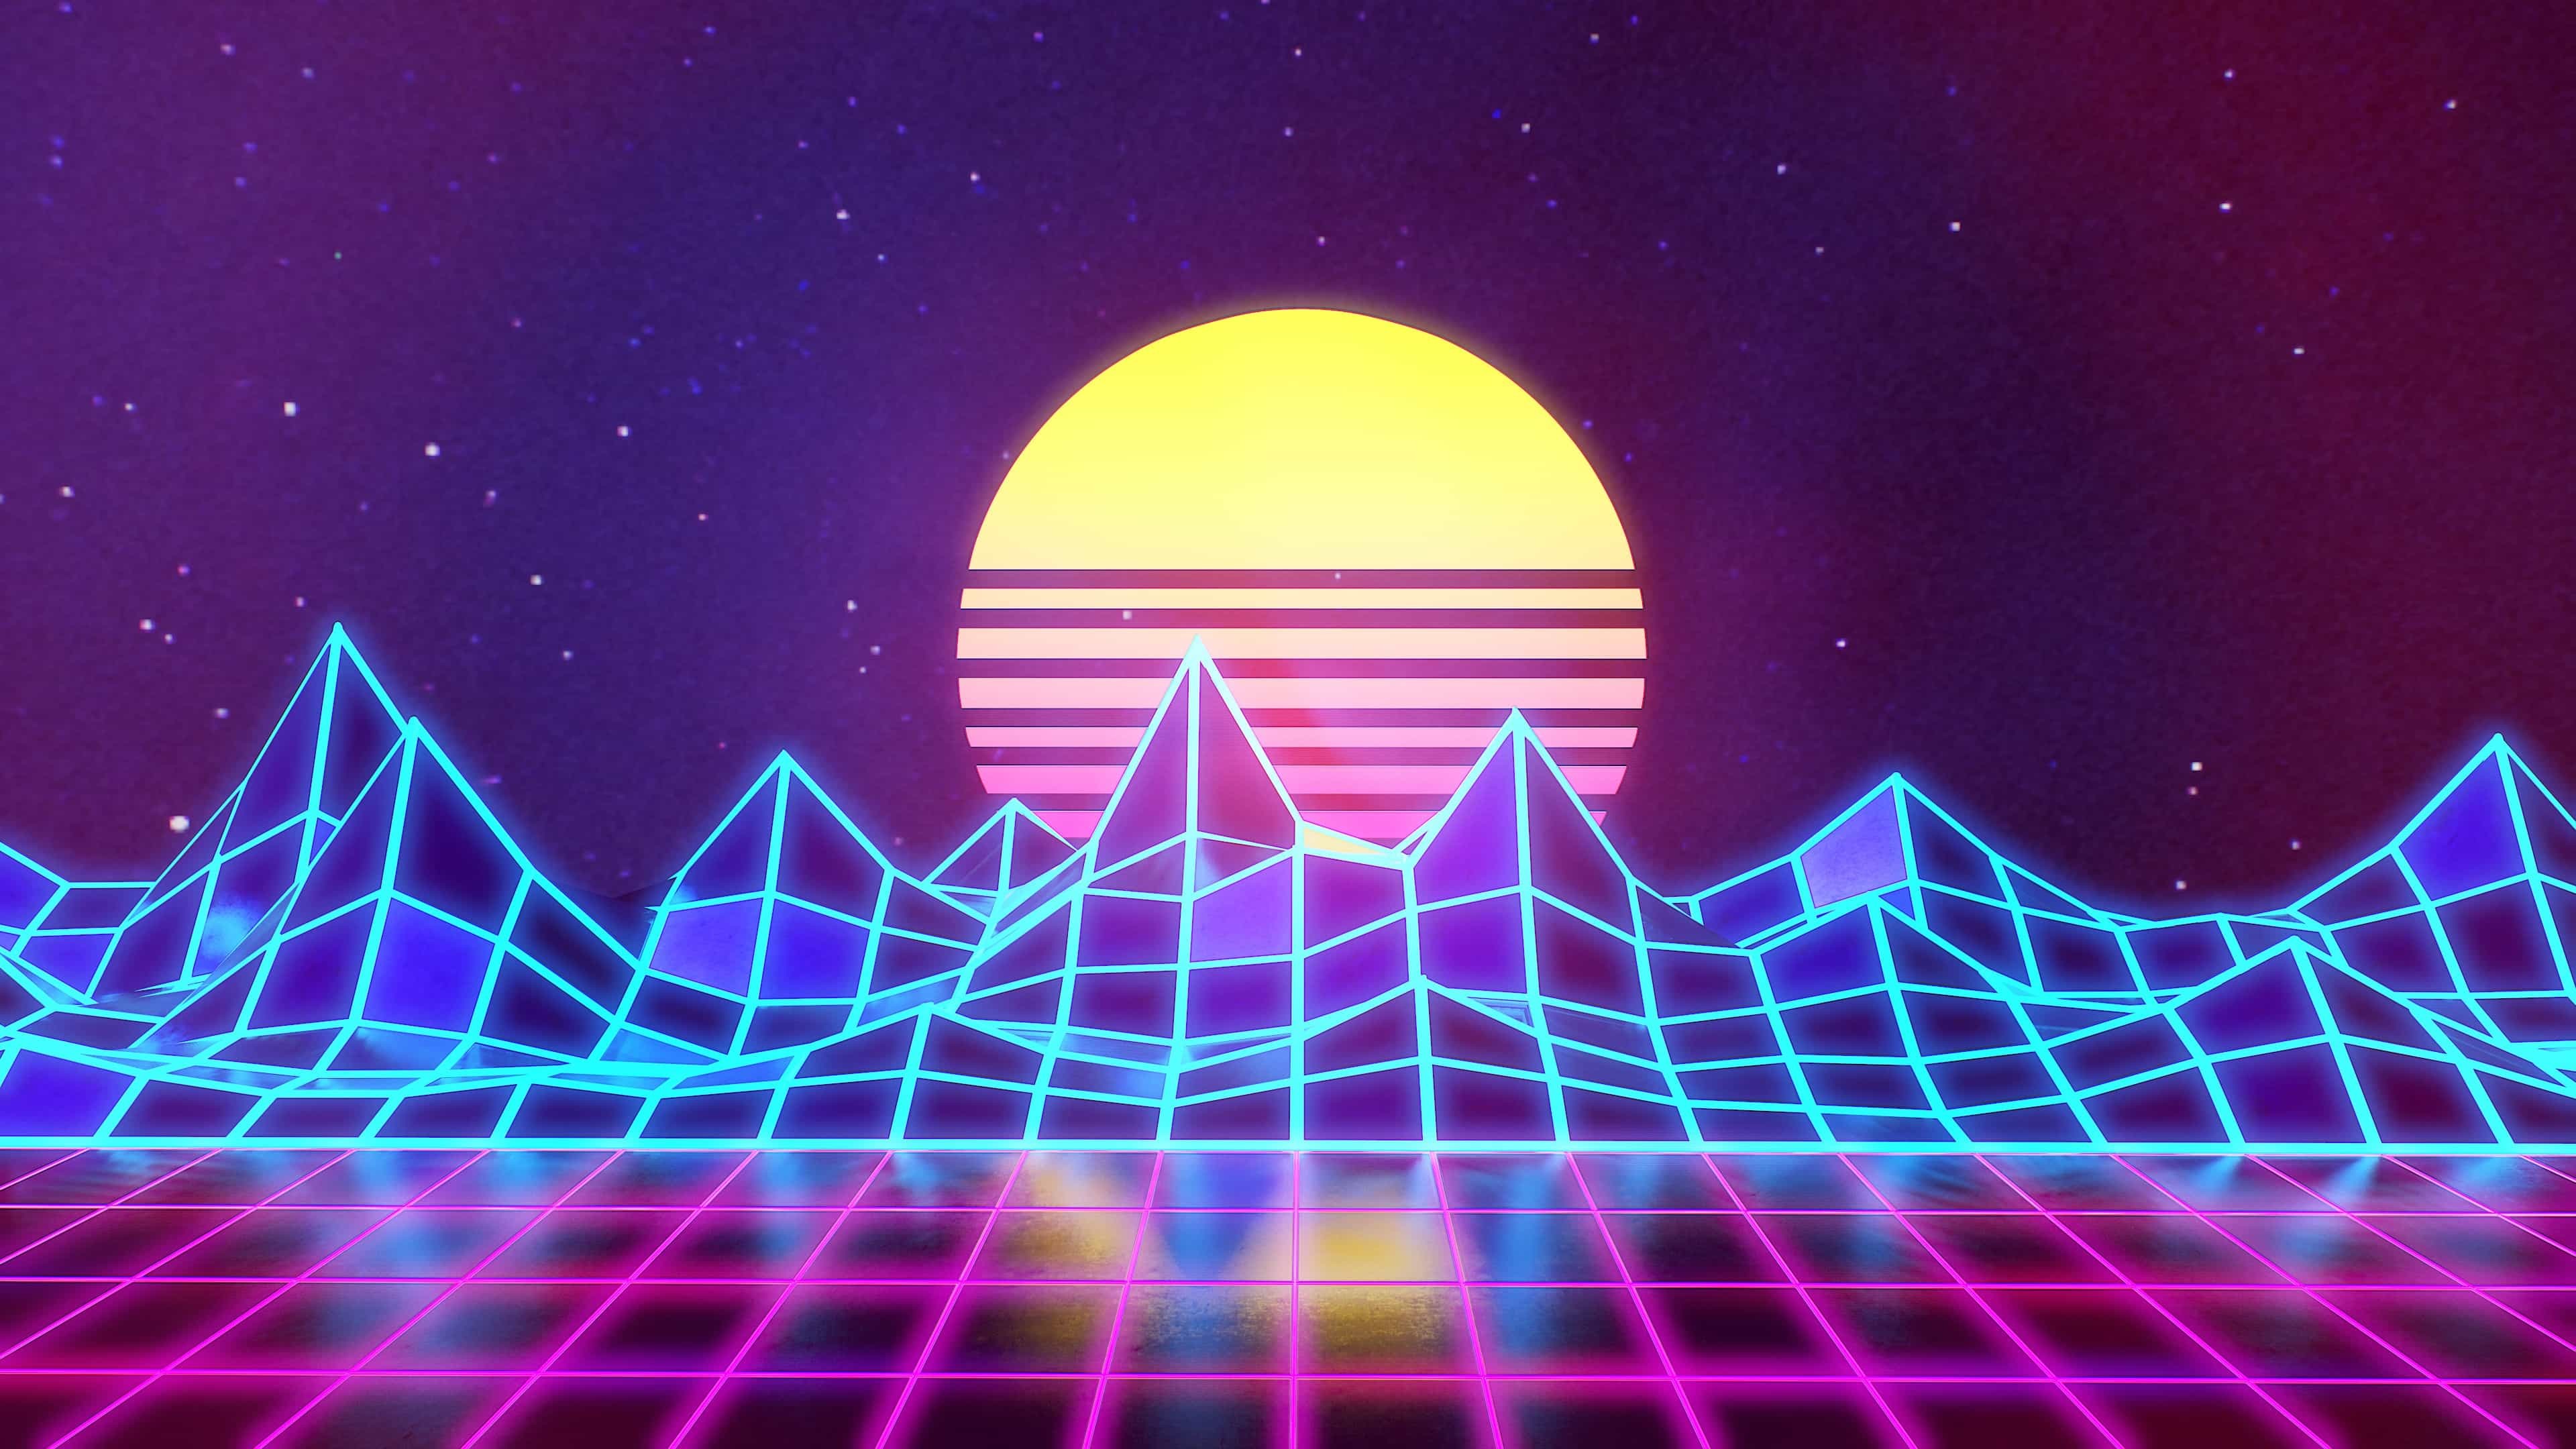 3840x2160, Synthwave - Neon 80s Background - HD Wallpaper 